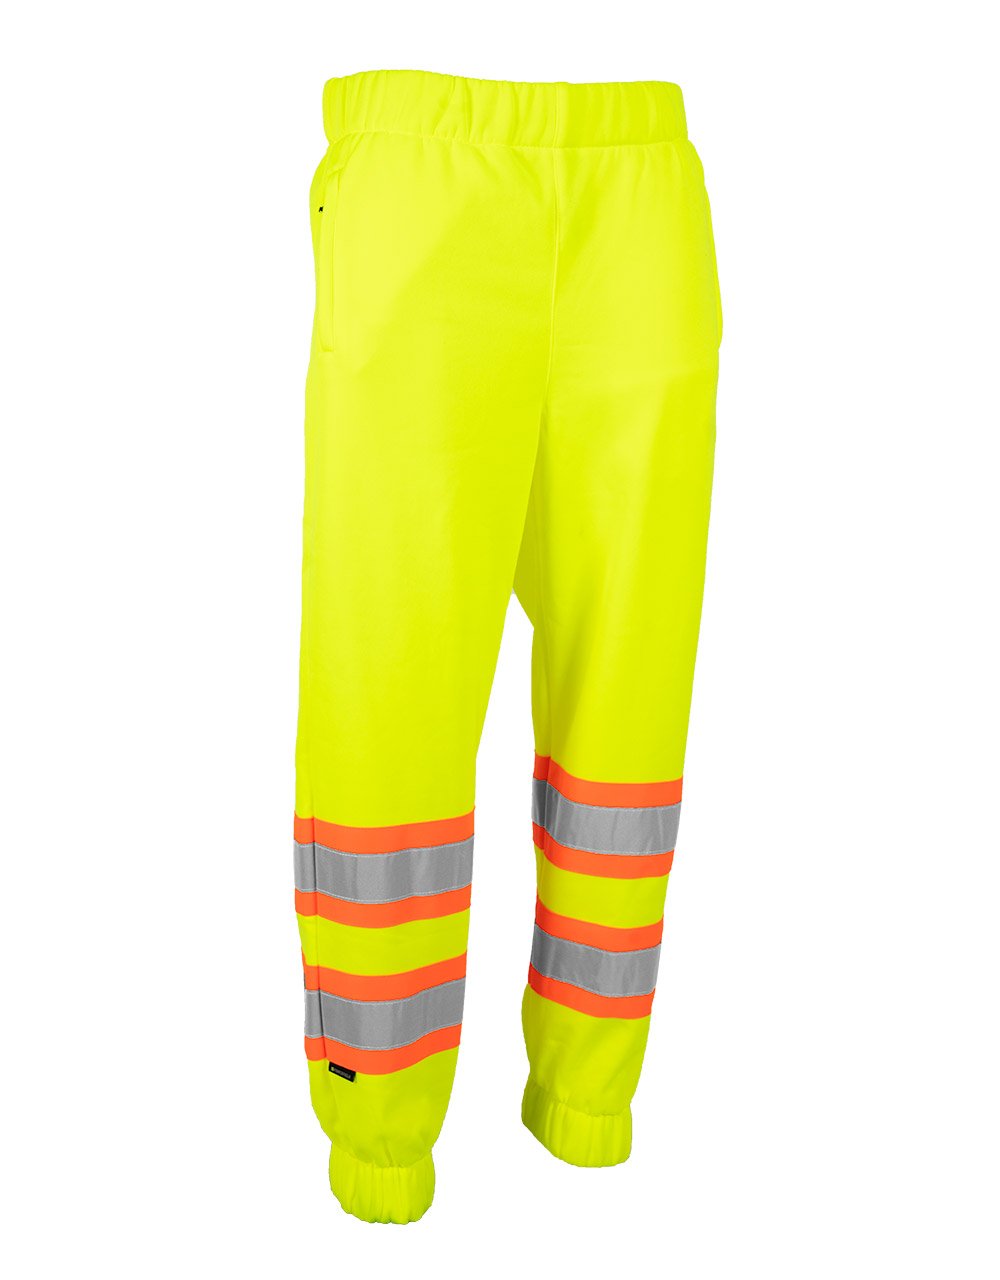 Forcefield Hi Vis Safety Tricot Traffic Pants with Vented Legs and Elastic  Waist